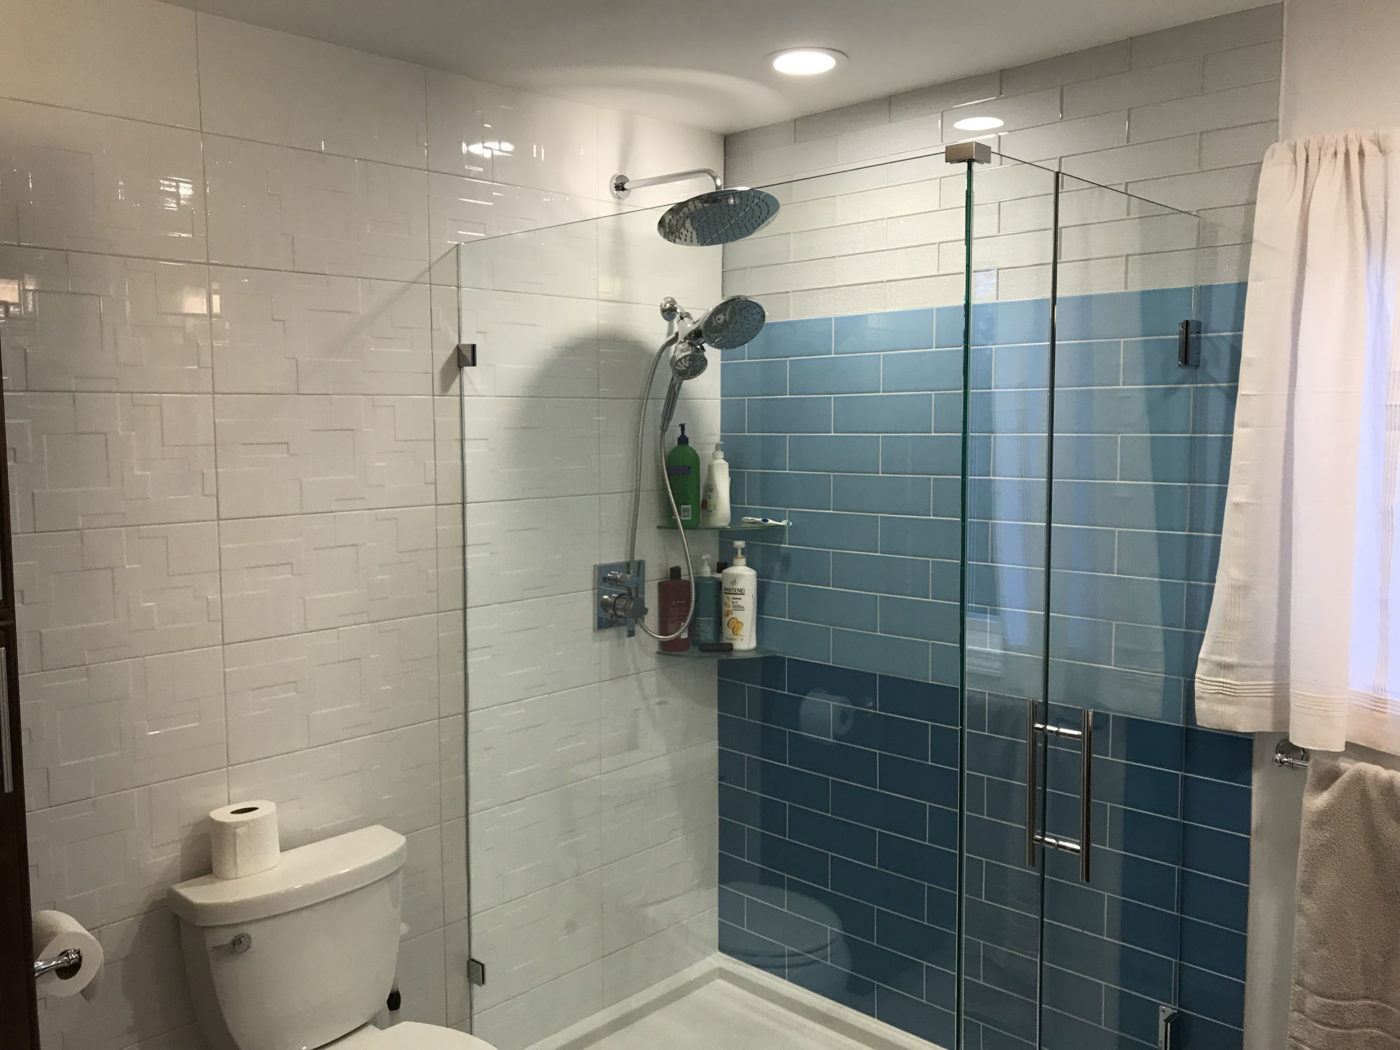 New transparent shower and tiles in Schaumburg IL